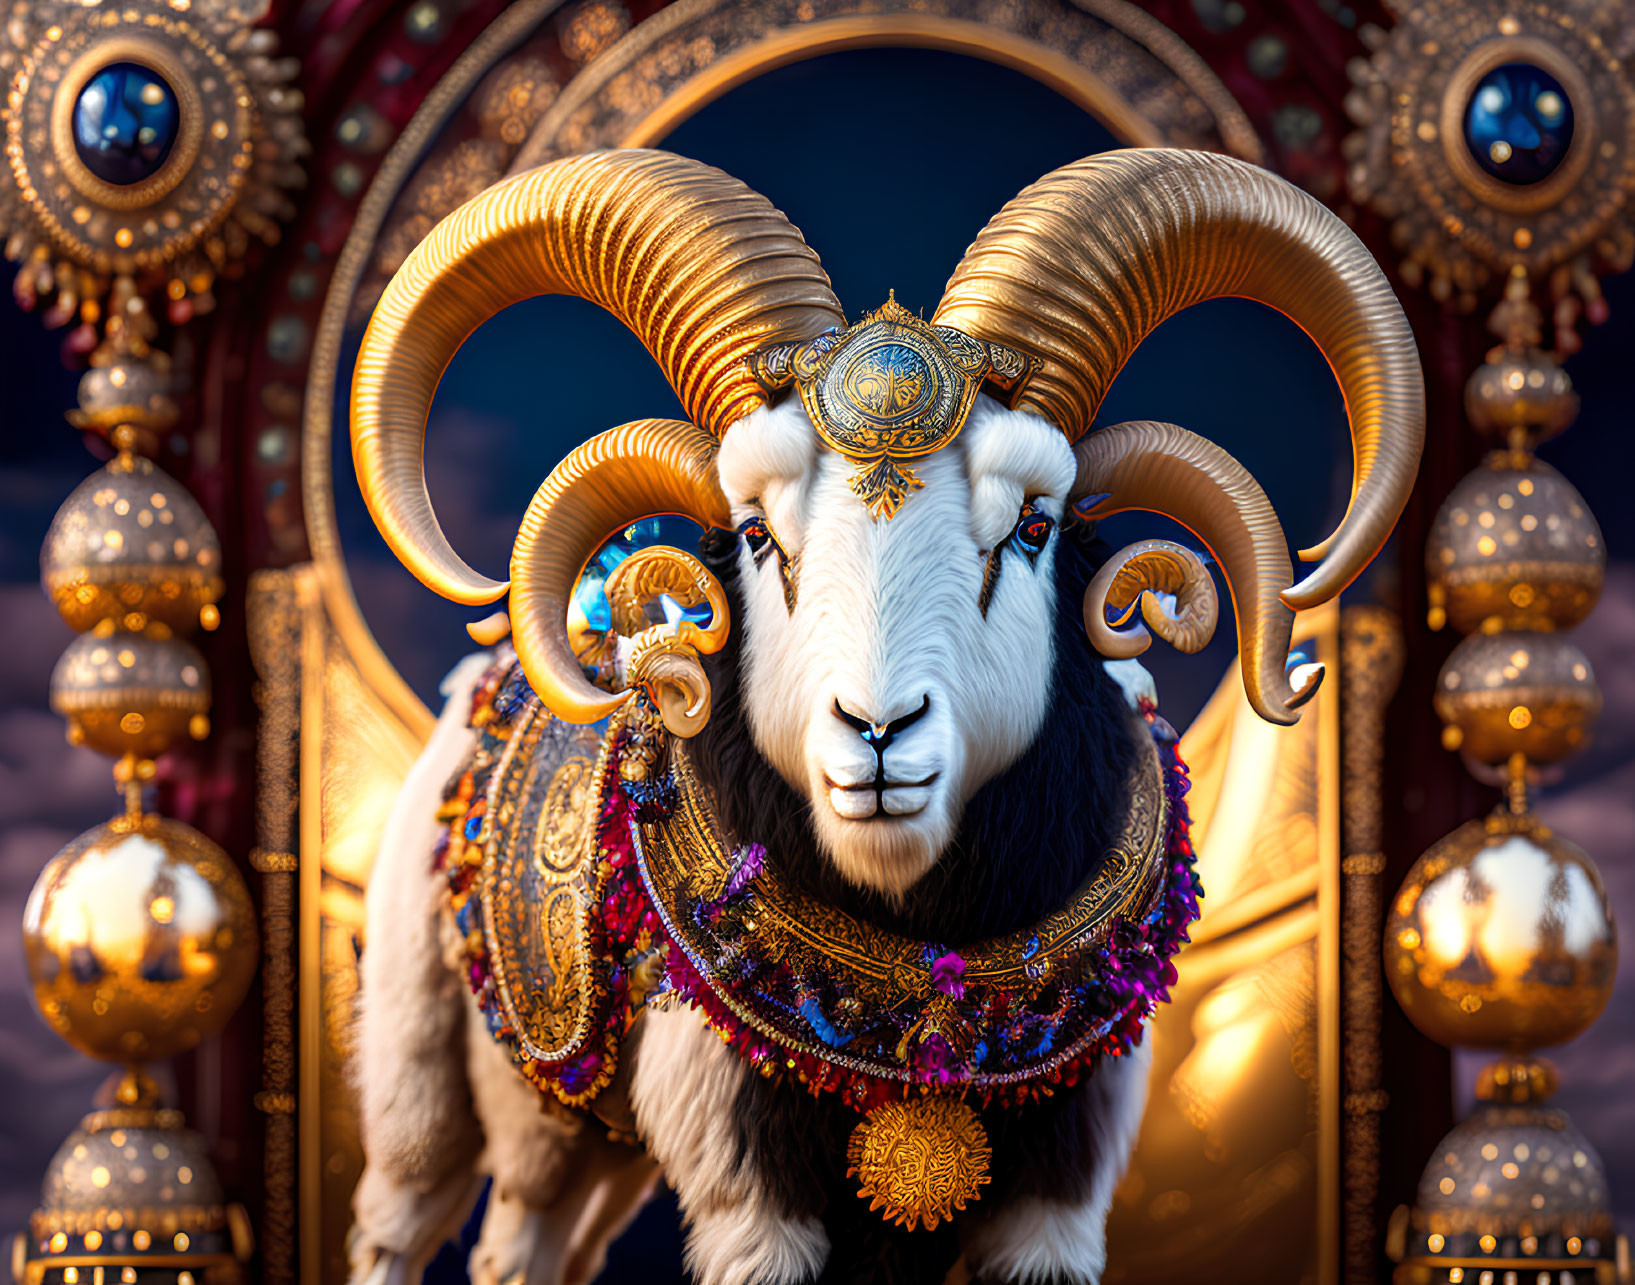 Majestic ram with golden horns and luxurious decorations on archway backdrop